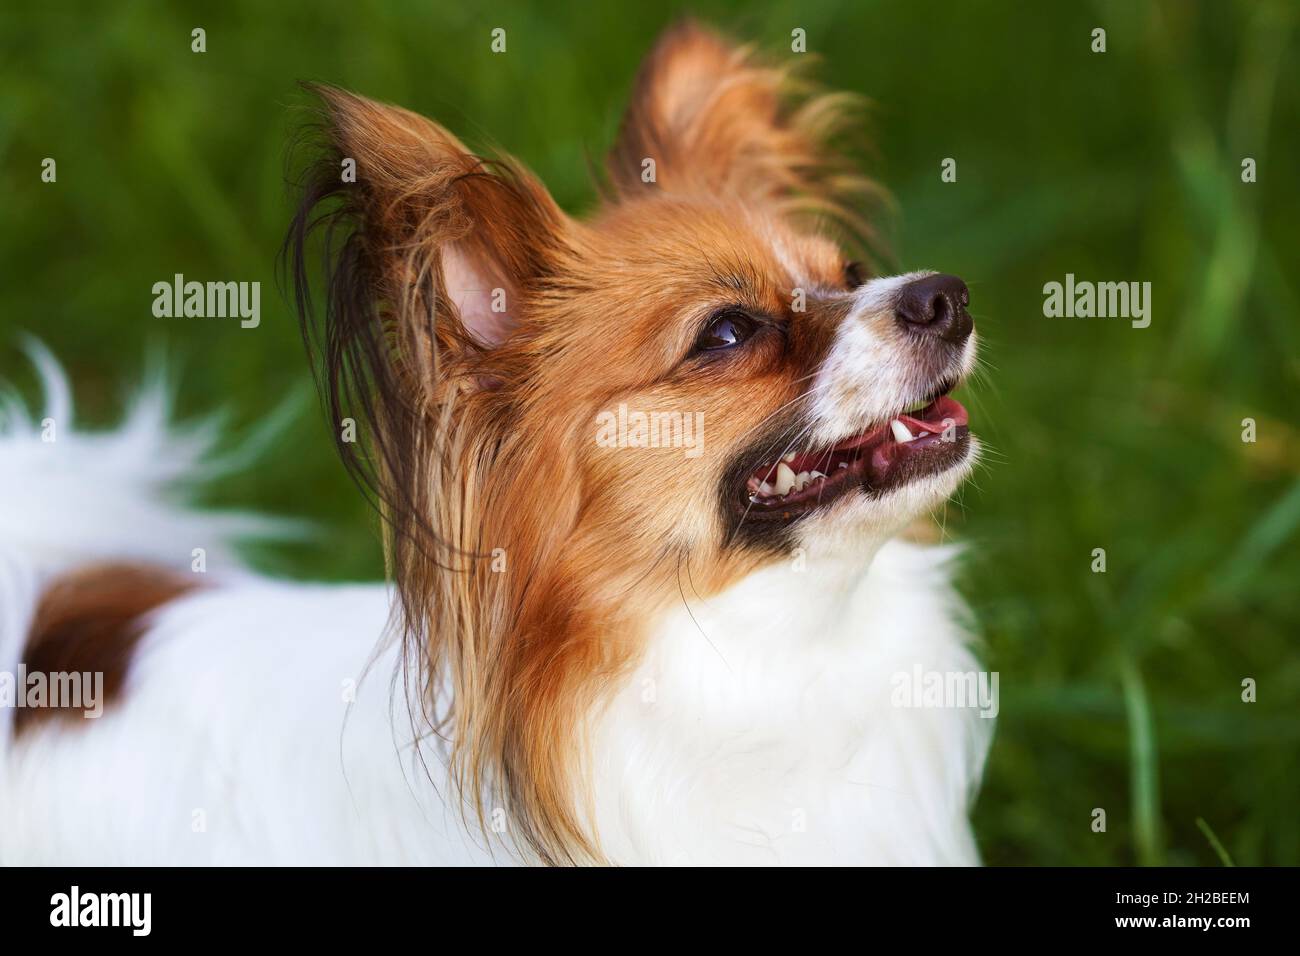 Portrait of The Papillon Dog, the Continental Toy Spaniel.  Pet animals. Purebred dog.  Sunset. Copy space. Stock Photo